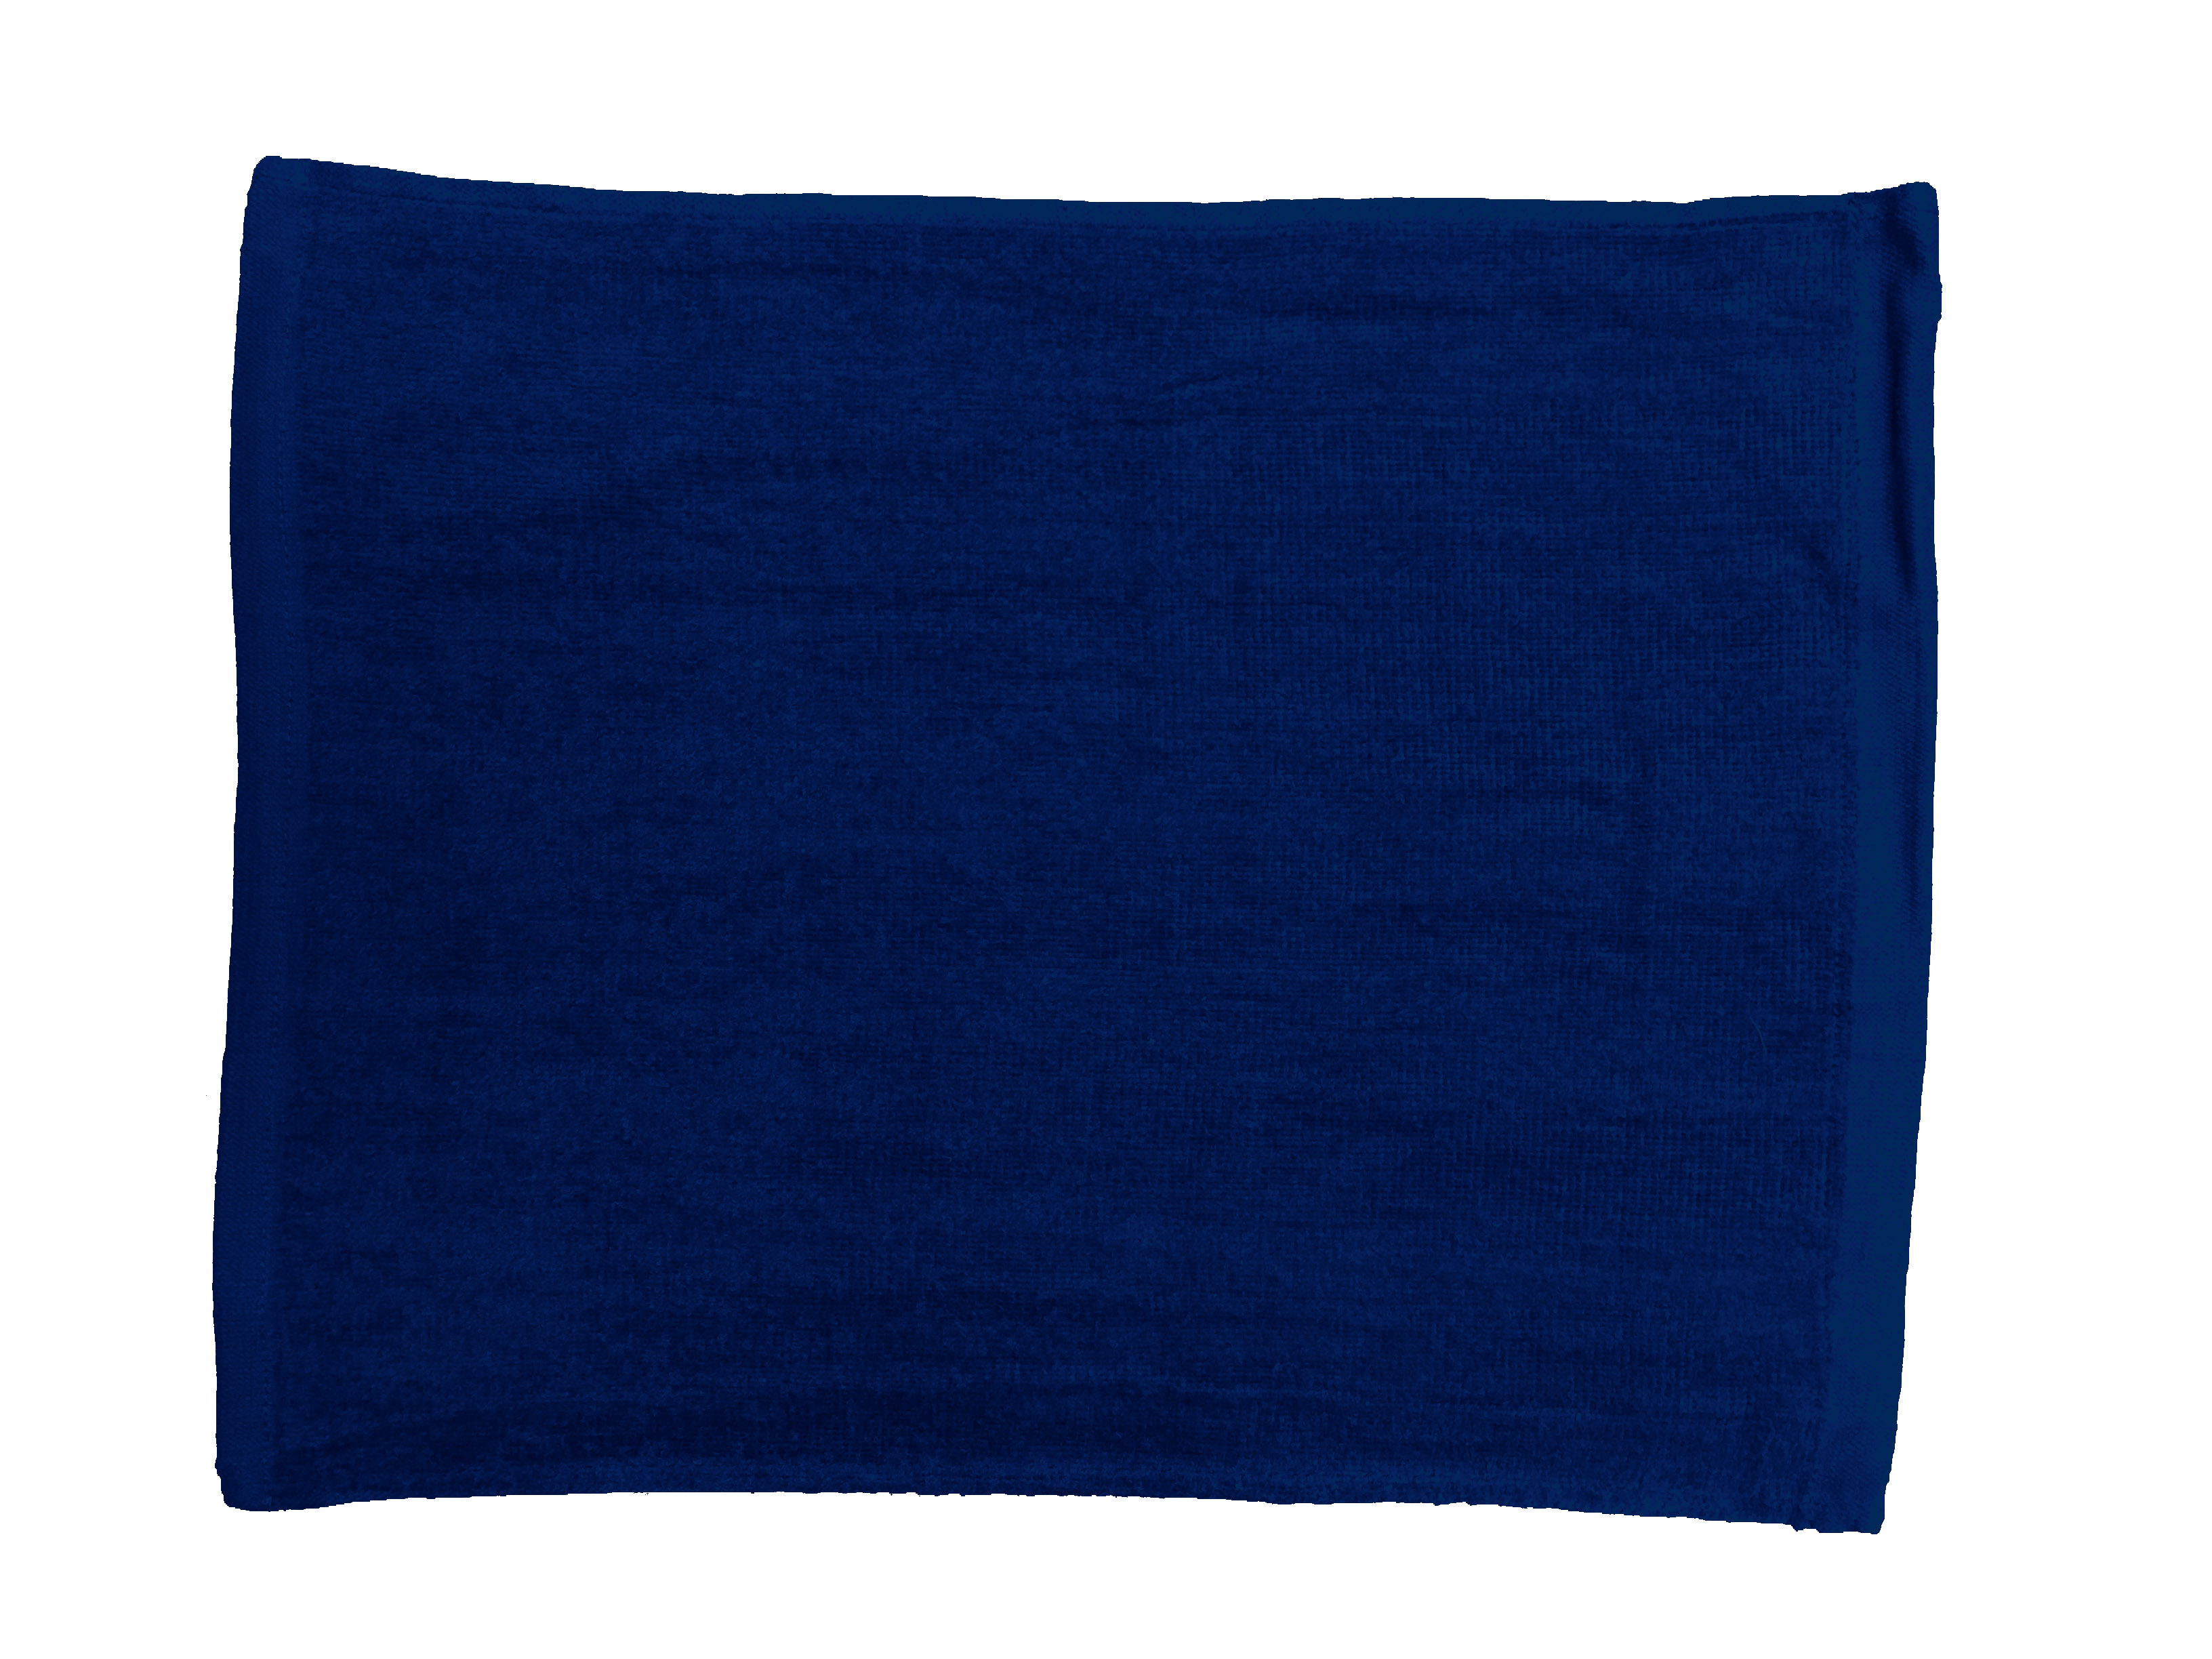 TowelsOutlet.com - 15x18 Blank Rally Towel, terry velour 1.2 lbs per dz ...